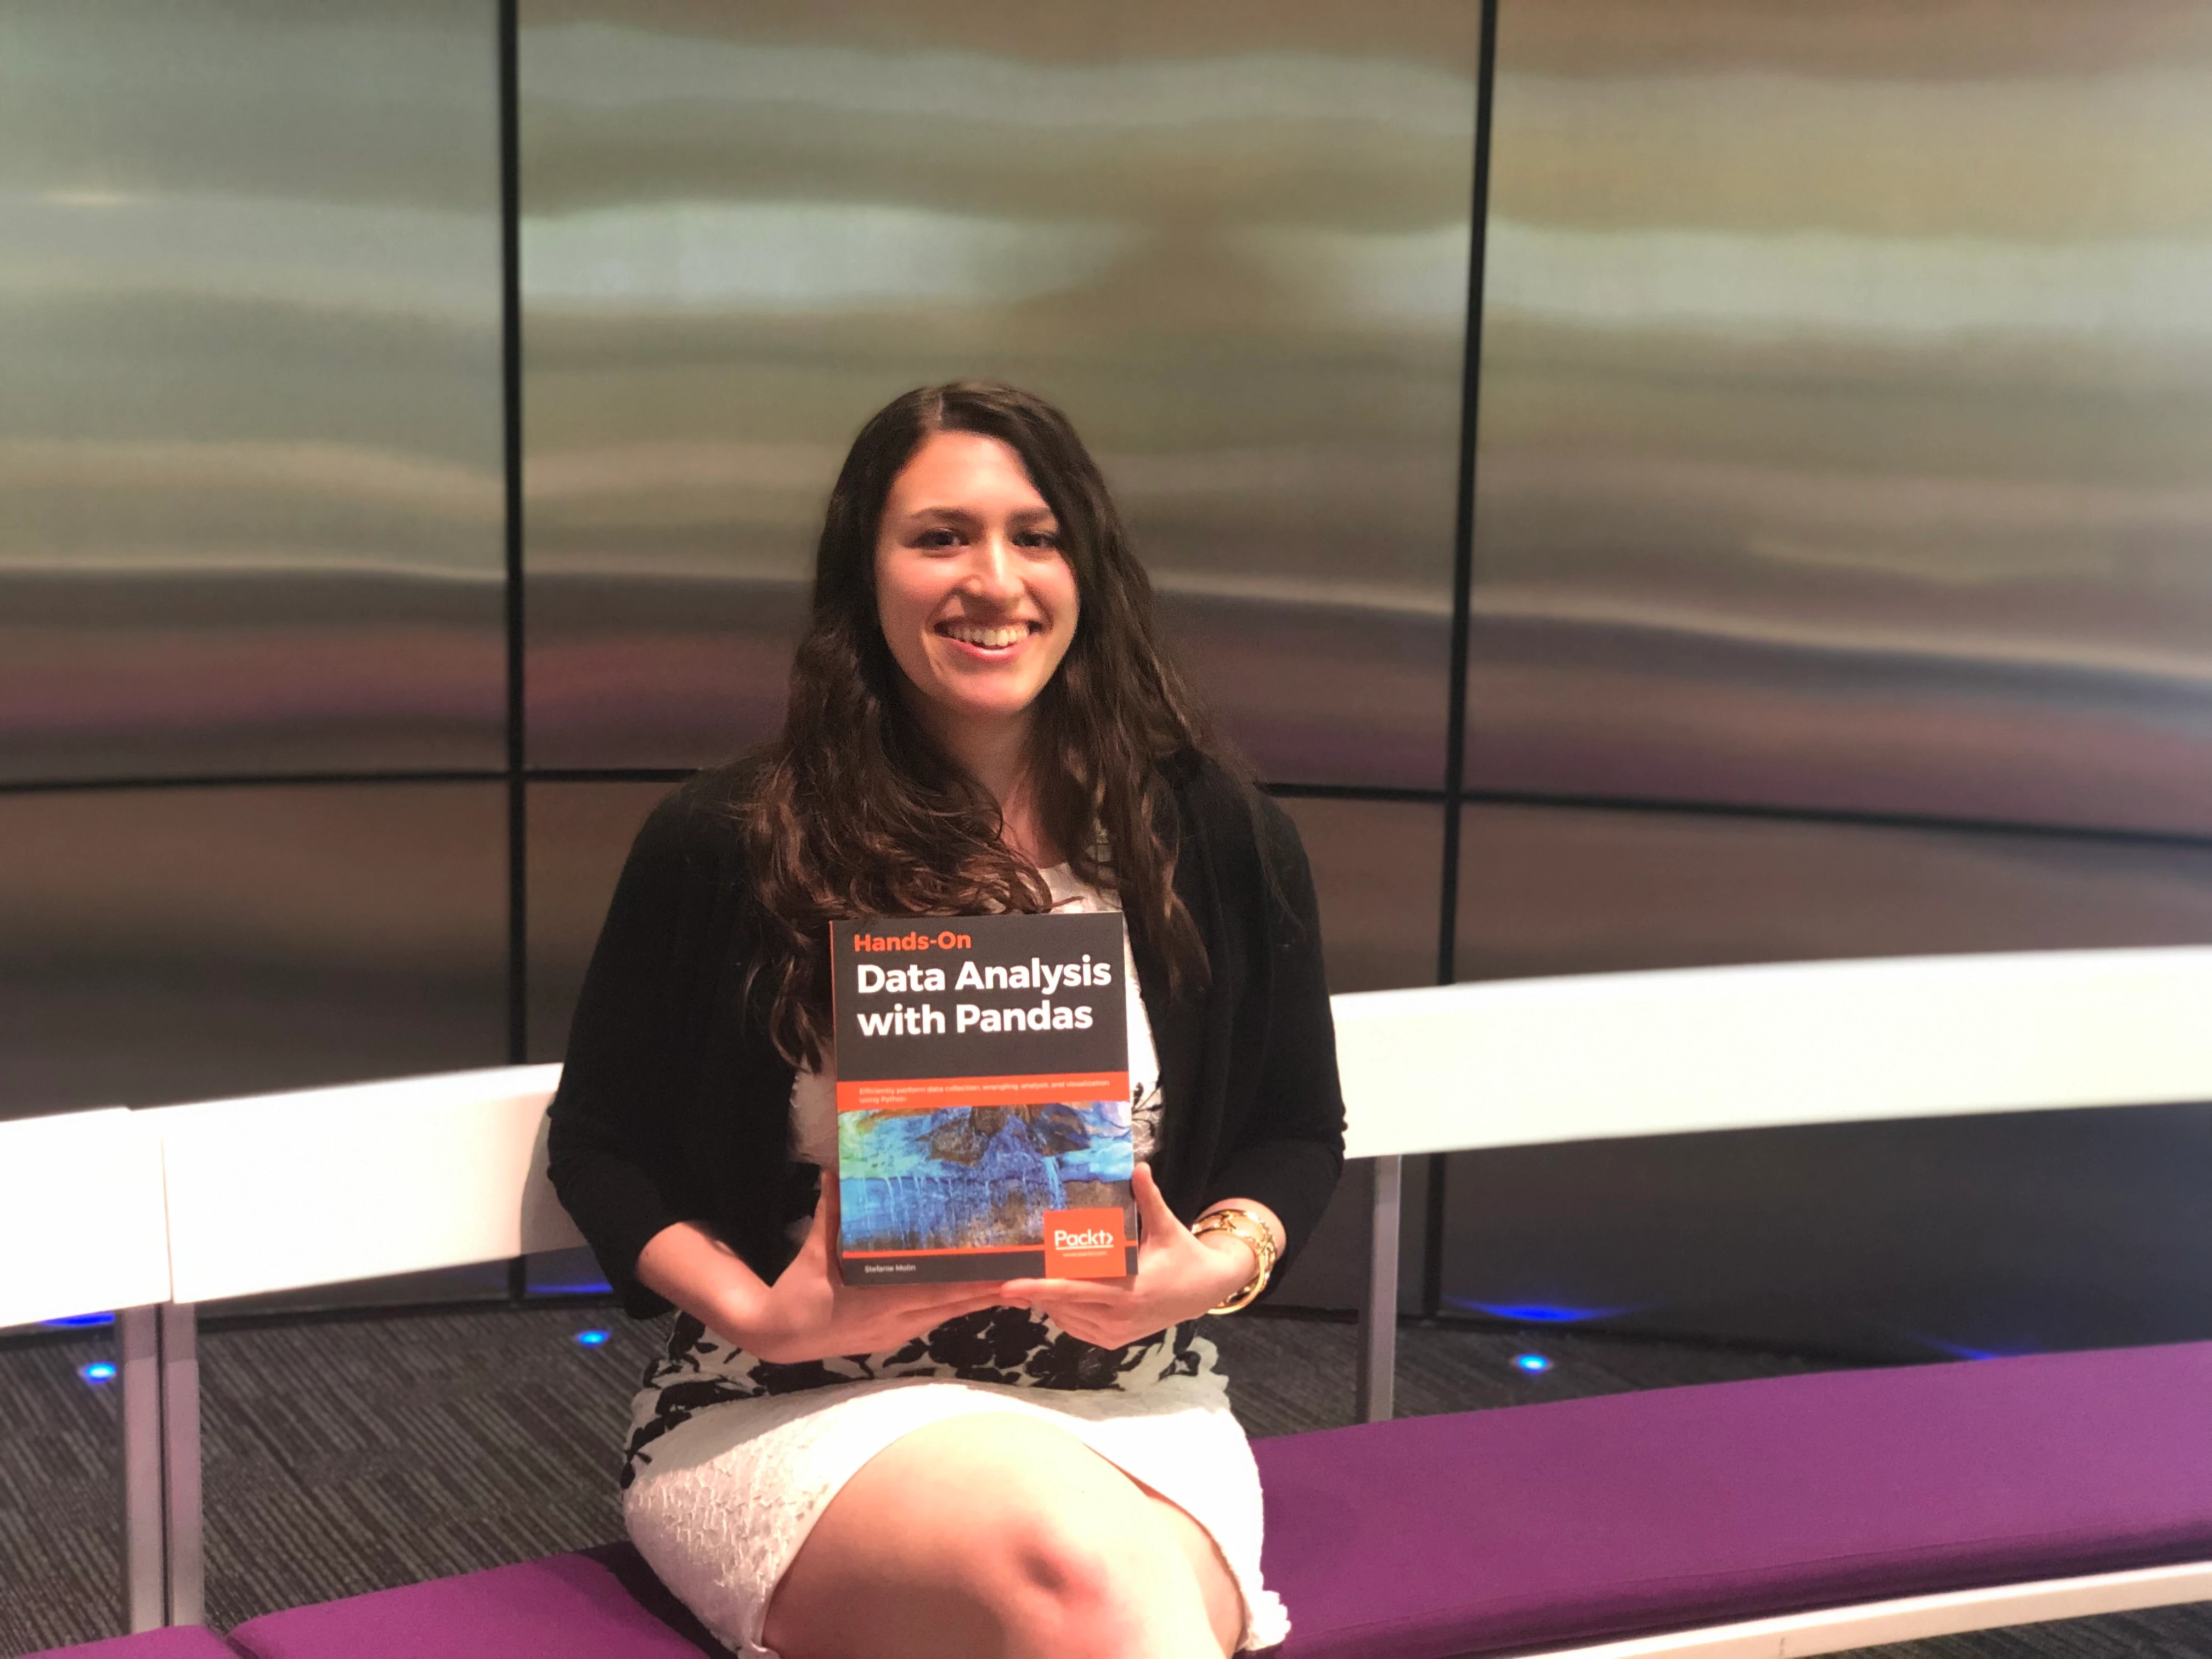 A Conversation with Bloomberg's Stefanie Molin about her new book on Data Science, Python and Pandas